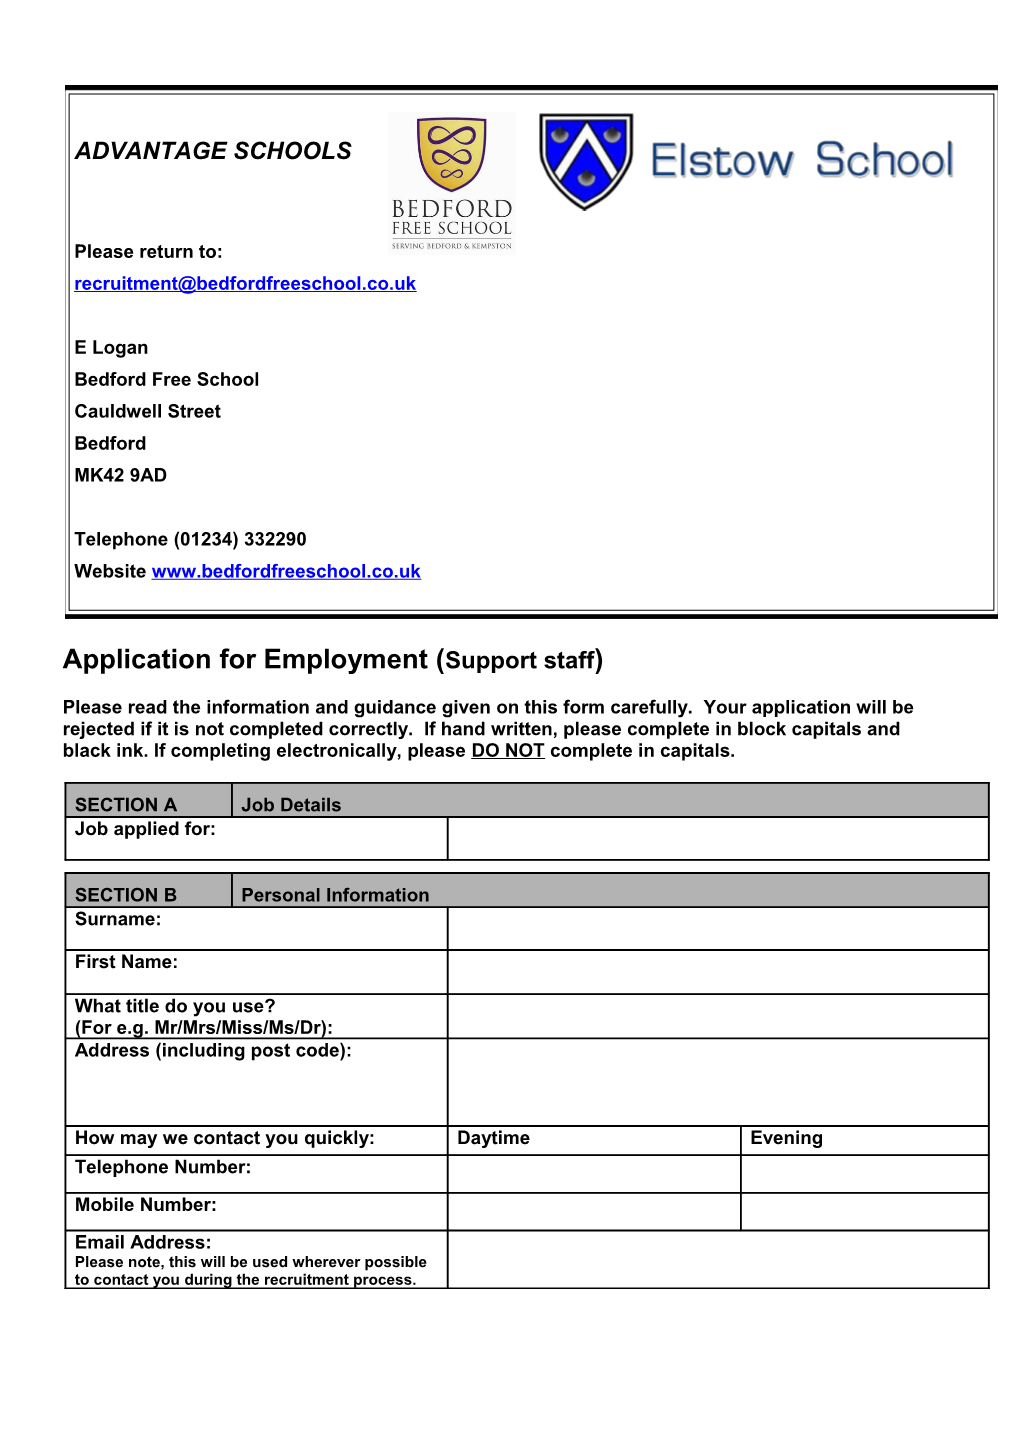 Ex-Employer Reference Check Form